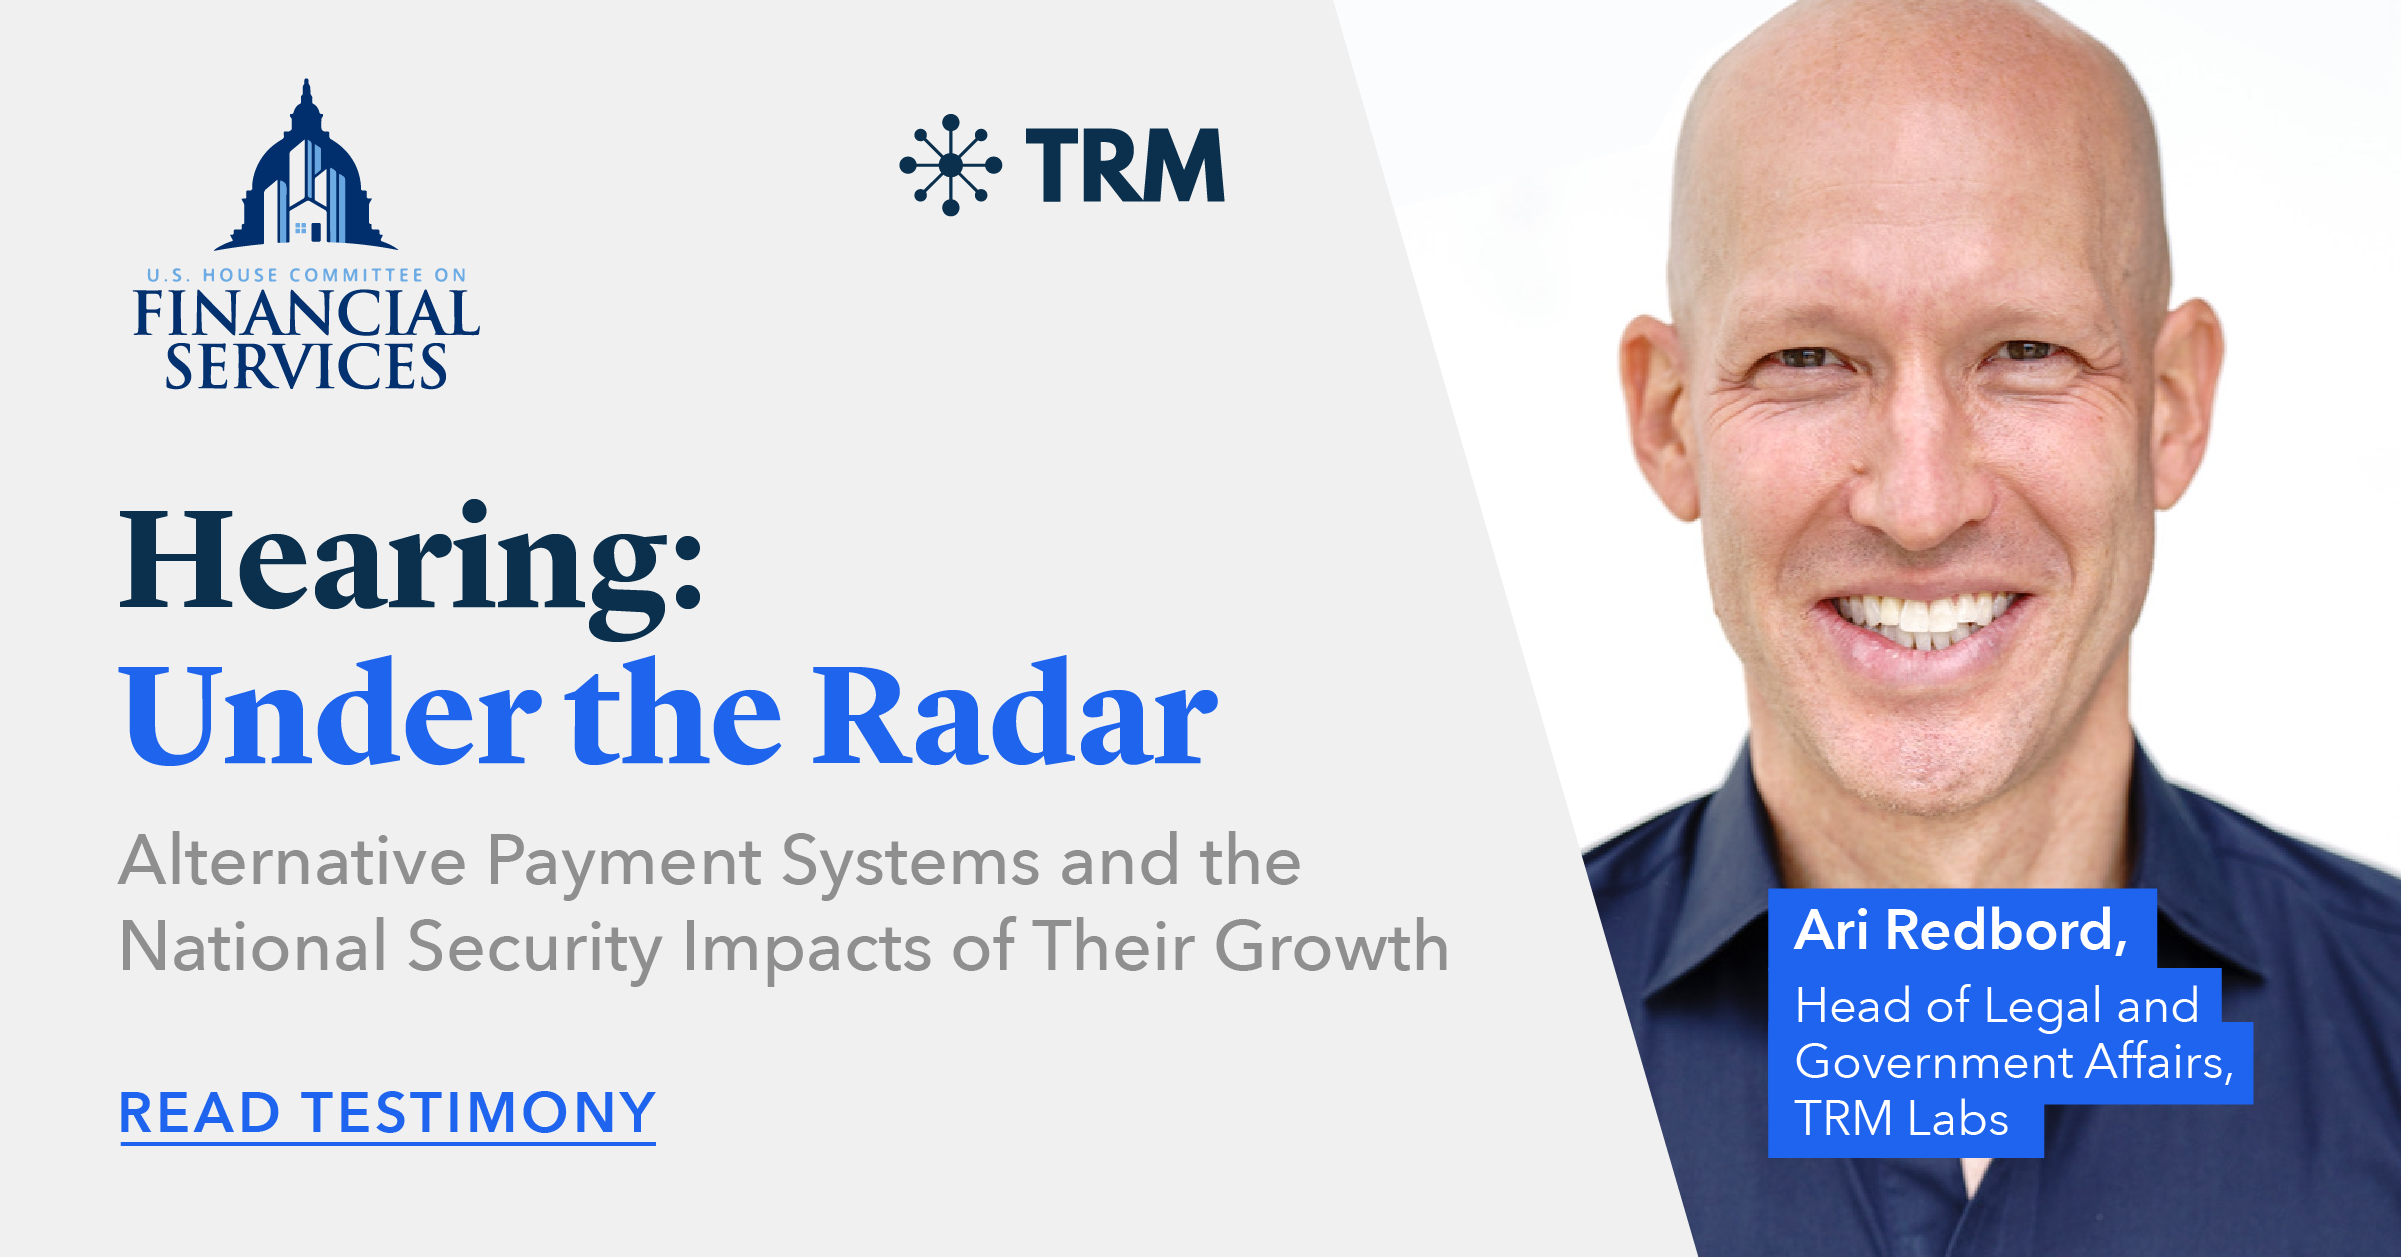 TRM's Ari Redbord testifies before the U.S. House Committee on Financial Services